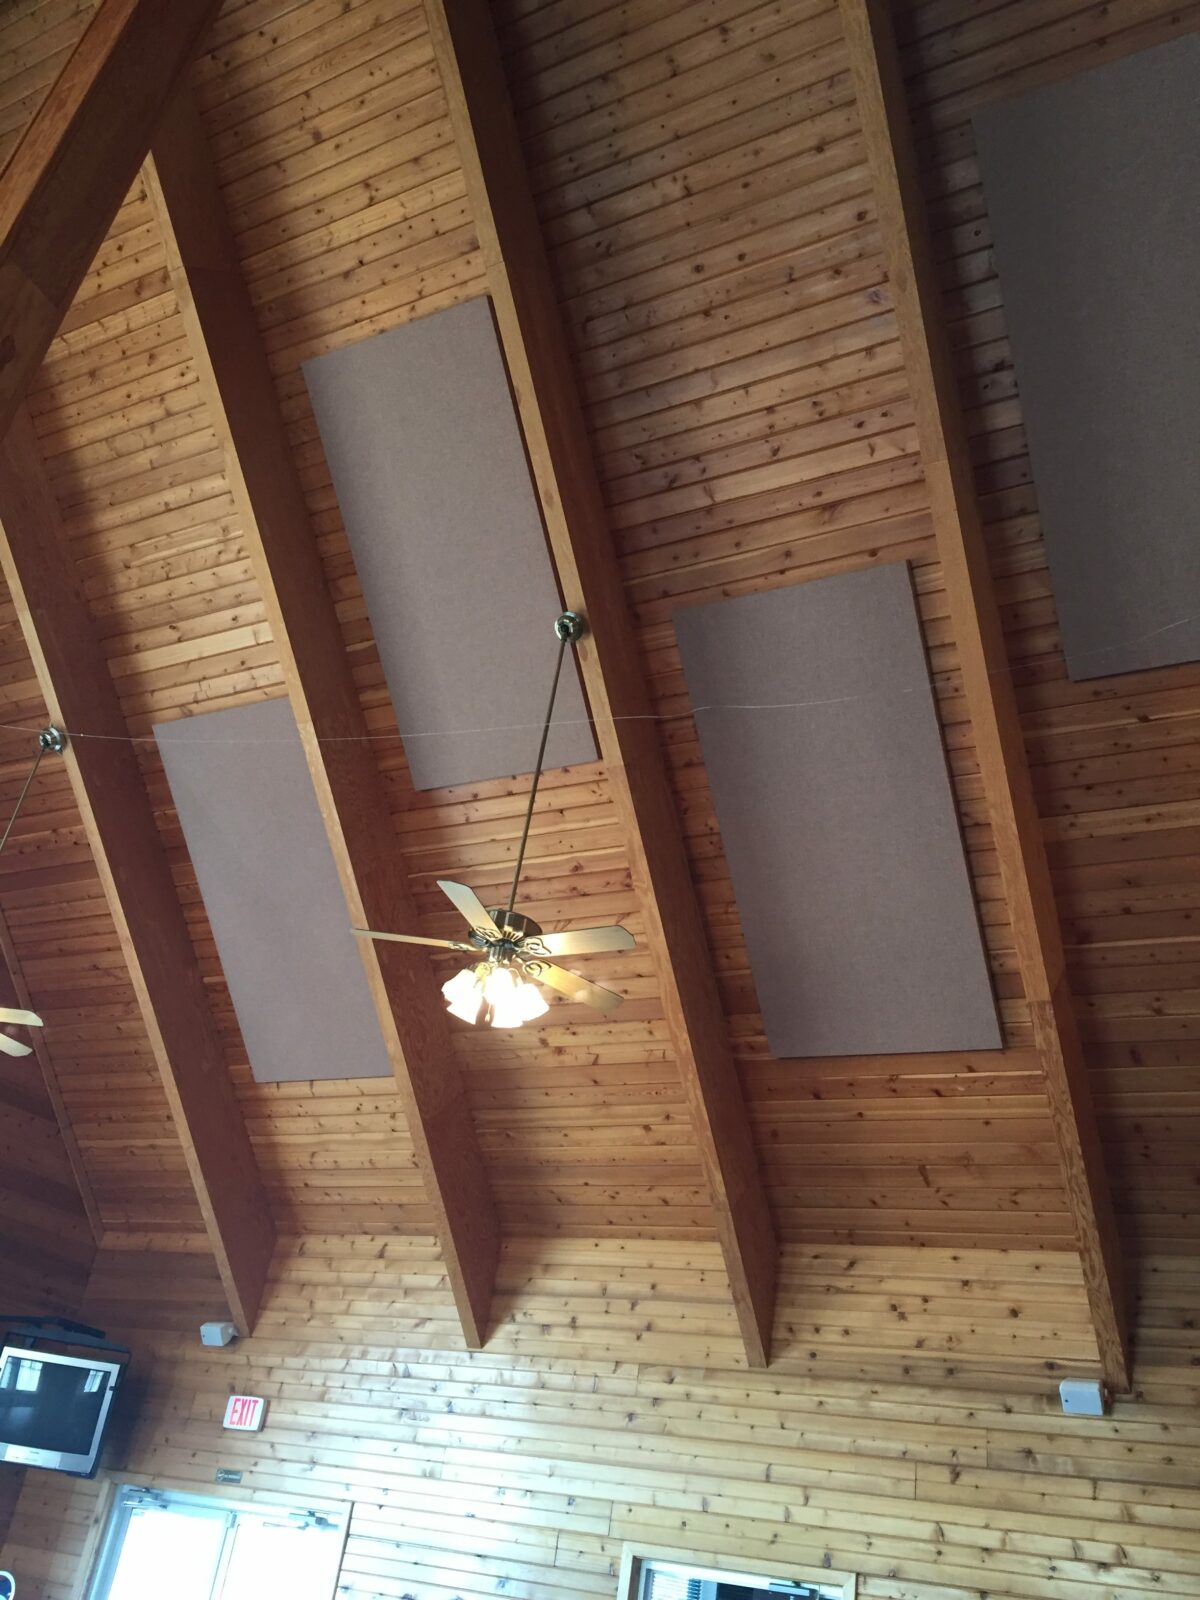 sound panels recessed into a ceiling to soundproof a room